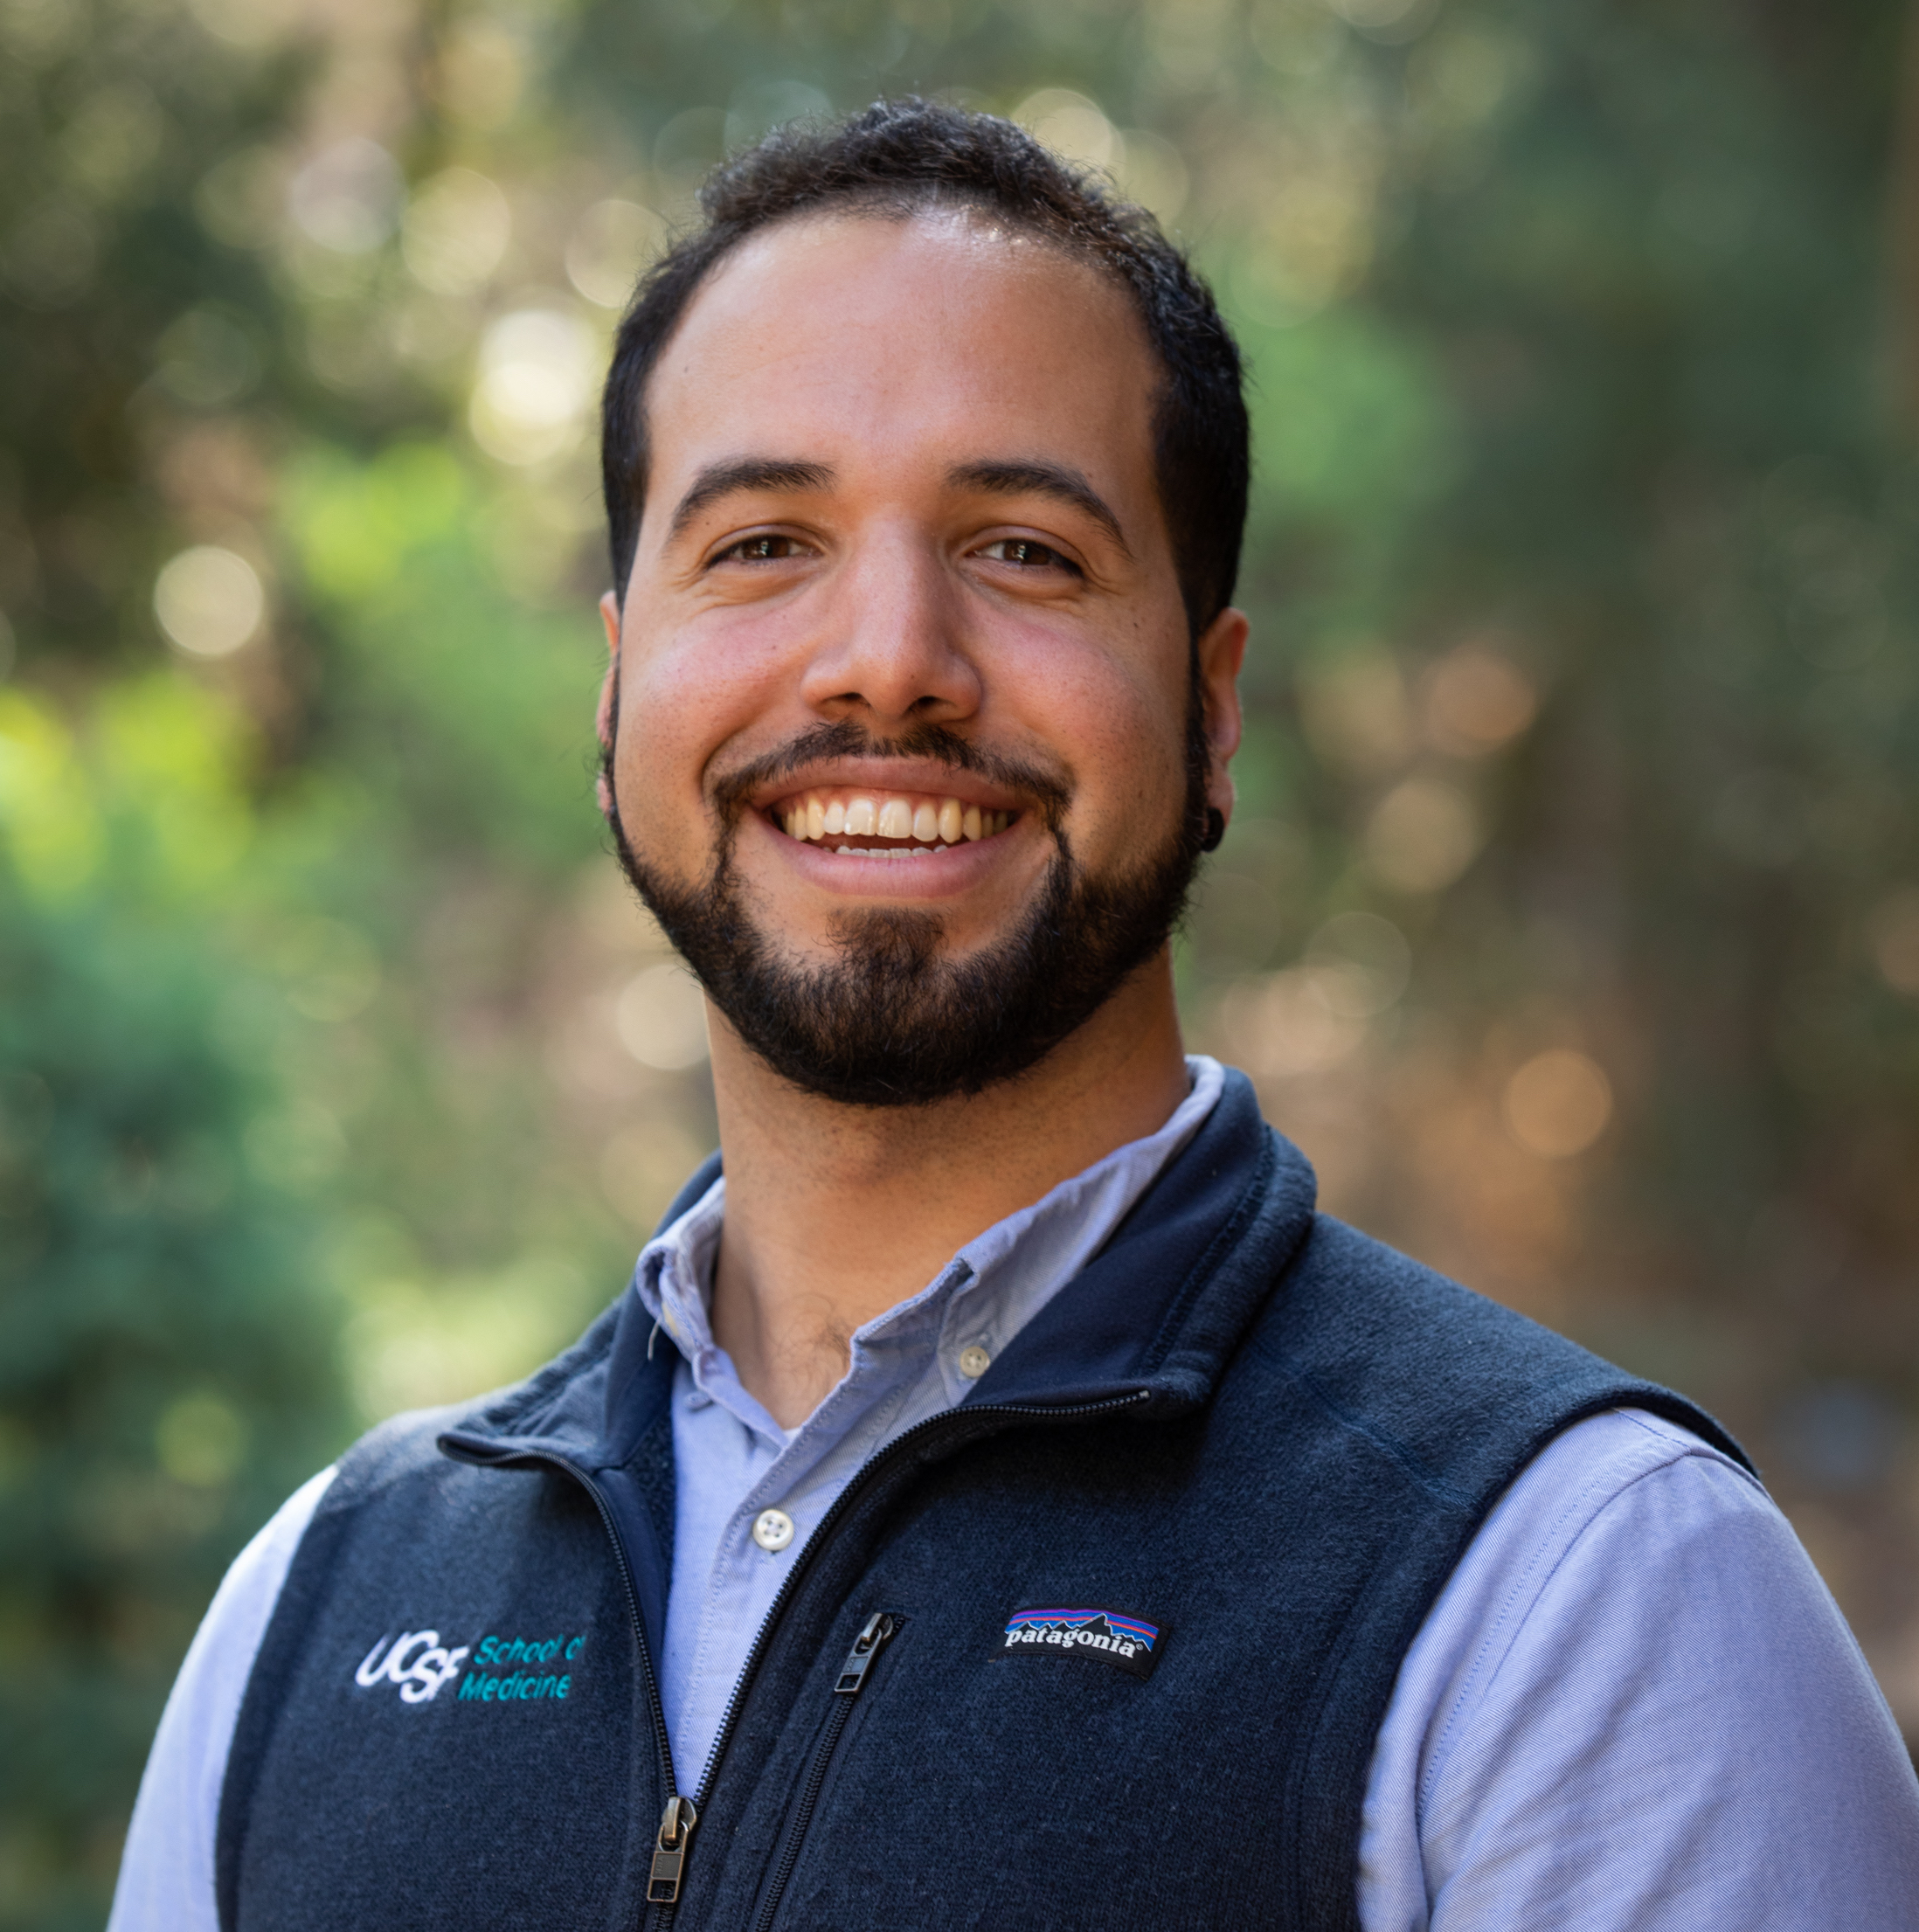 Professional headshot photograph of MD-PhD student Ernesto Rojas taken by photographer Elisabeth Fall